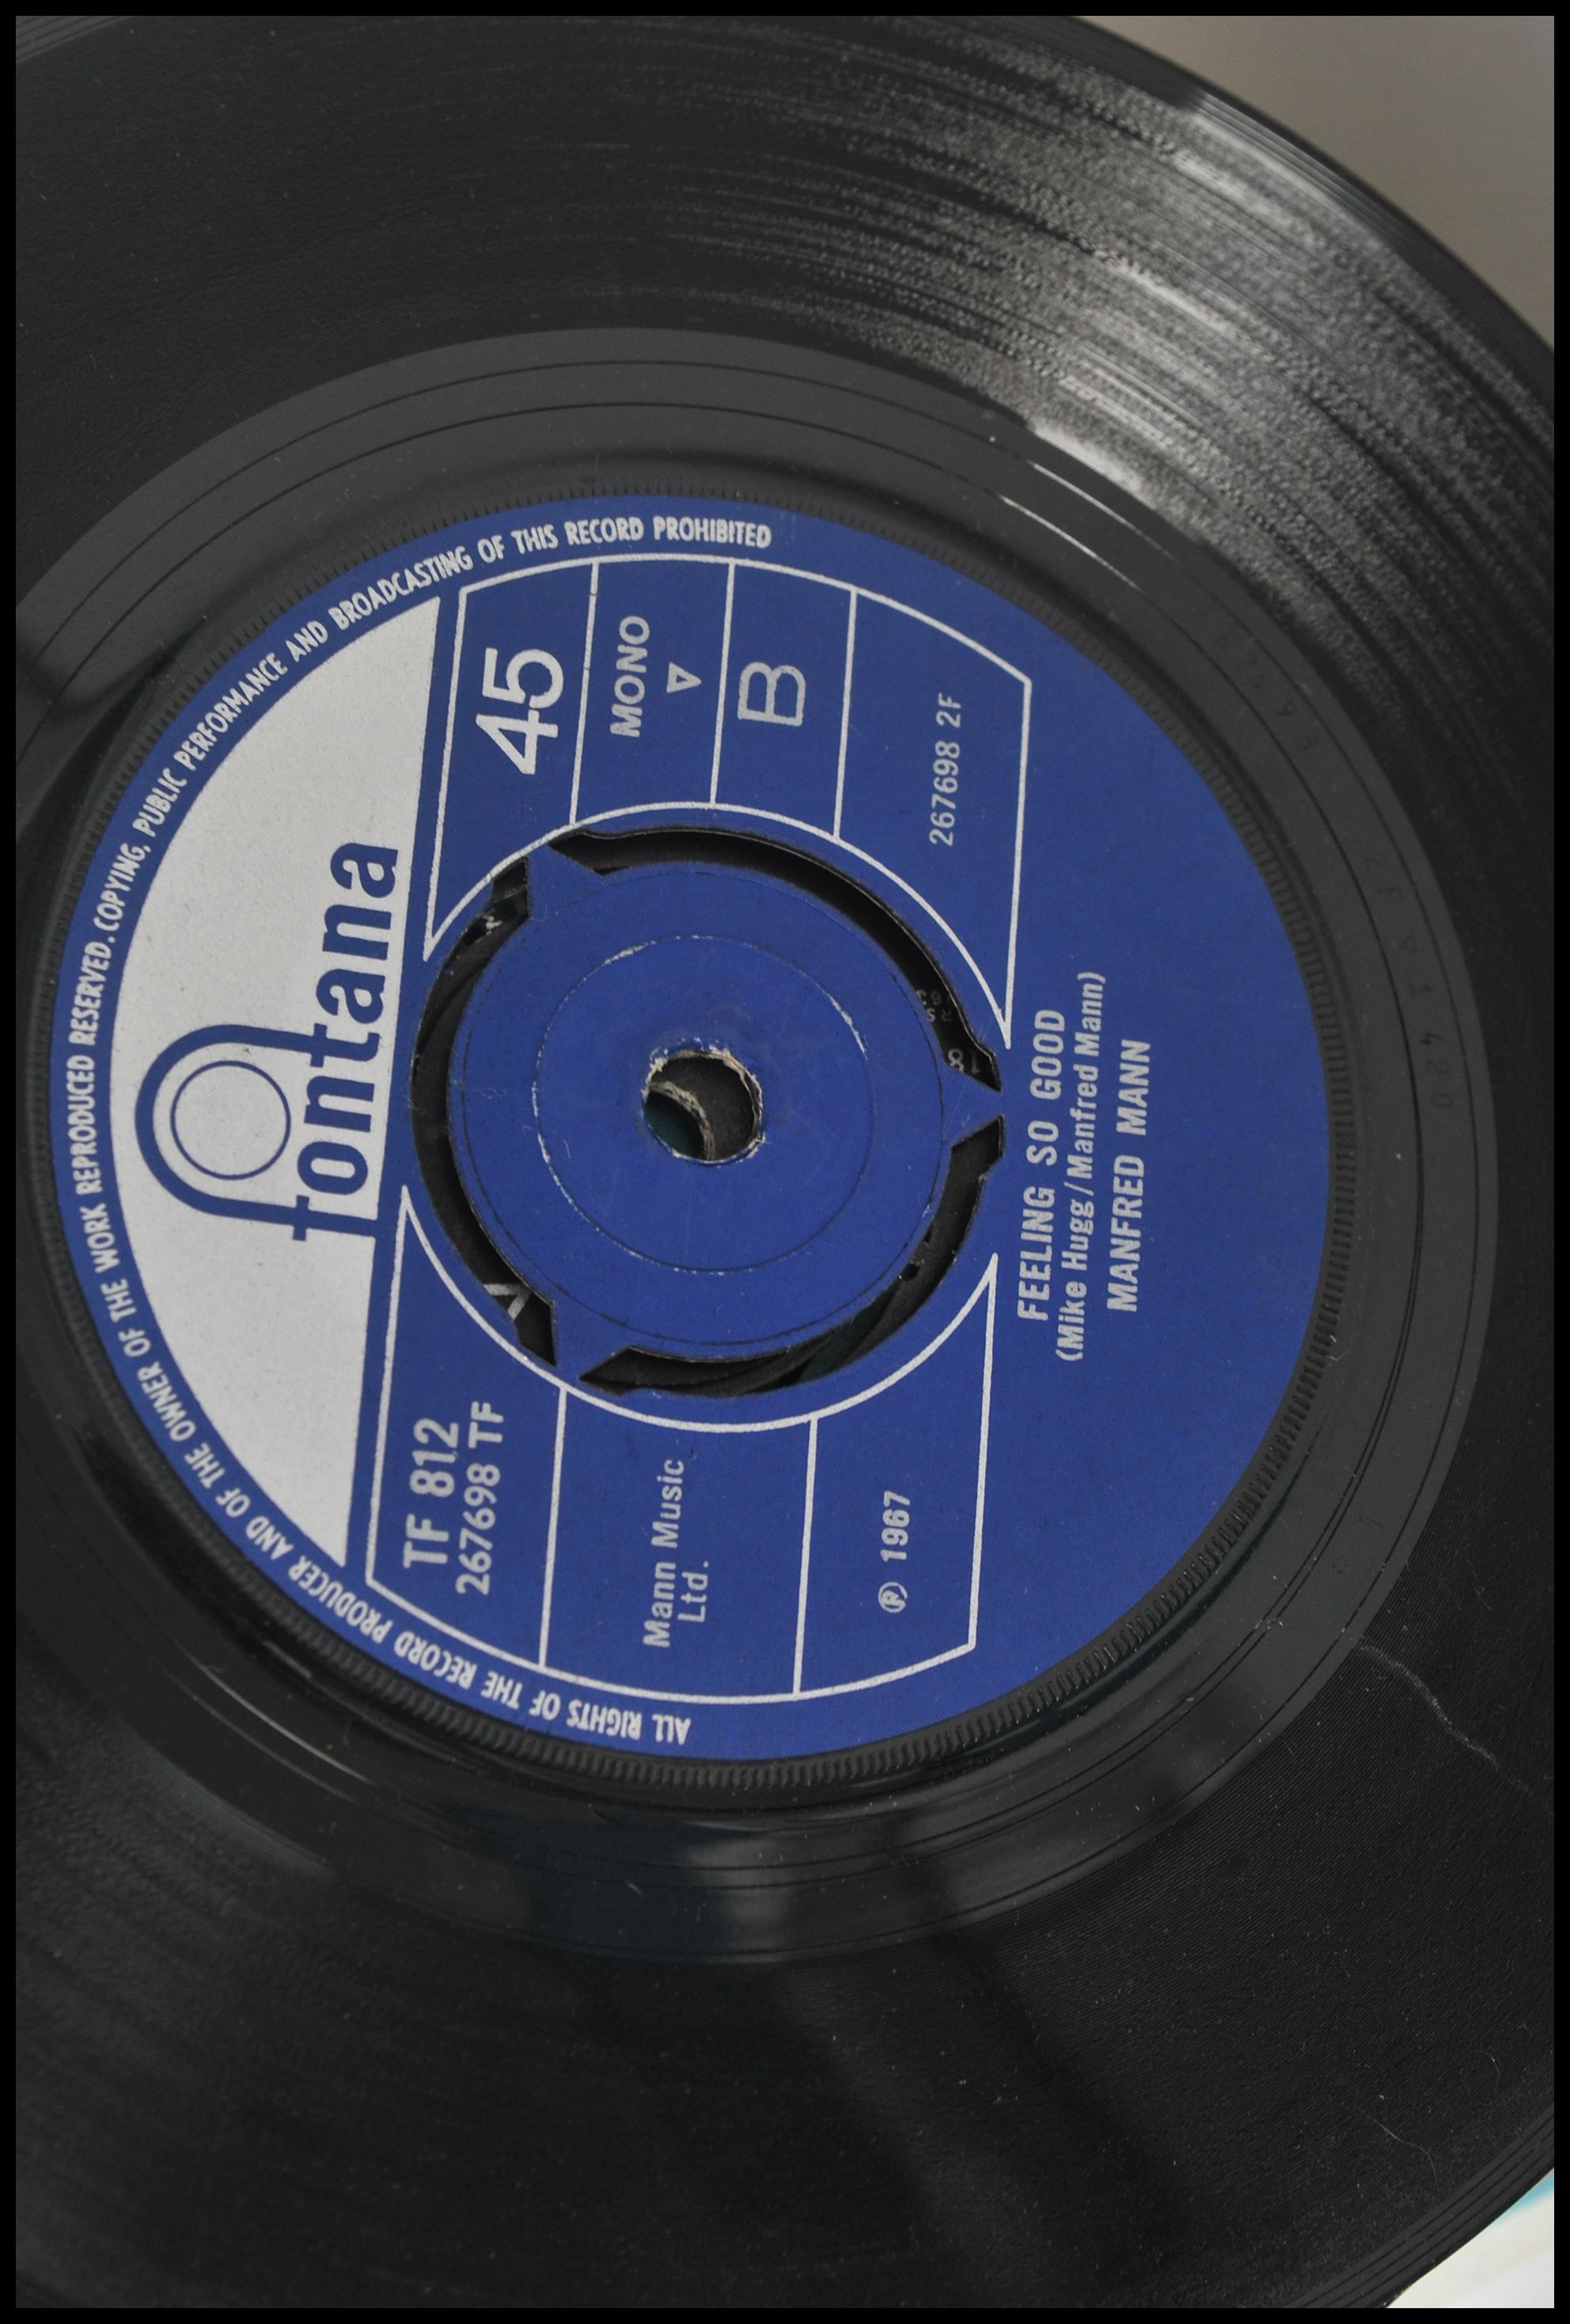 A collection of vinyl 7" 45rpm record singles dating from the 1960s featuring various artists and - Image 10 of 11